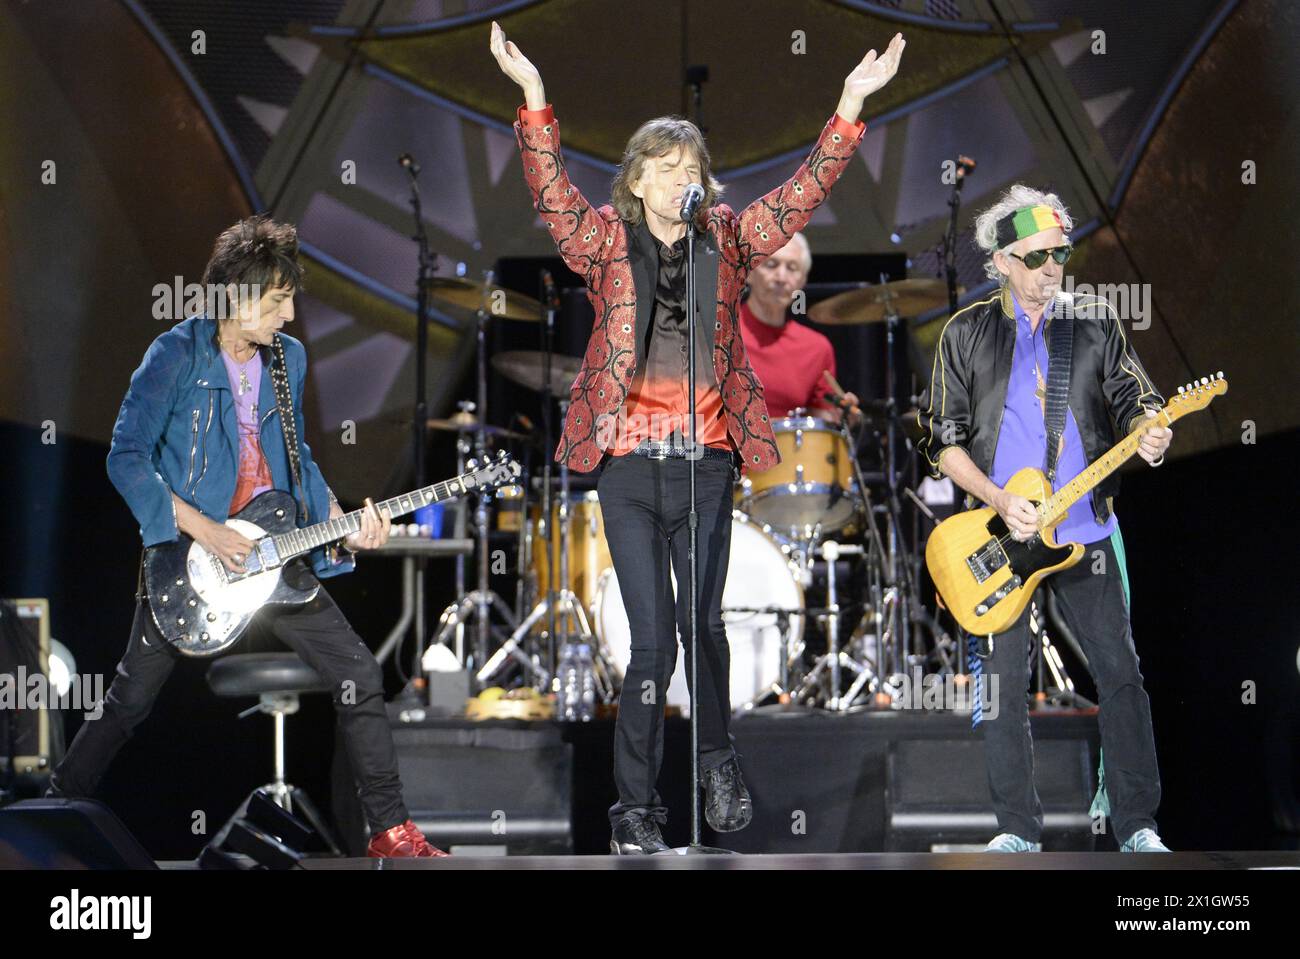 Members of British rock band The Rolling Stones, Mick Jagger, Keith Richards, Ronnie Wood and Charlie Watts perform on stage during a concert in Vienna, Austria, 16 June 2014. - 20140616 PD5384 - Rechteinfo: Rights Managed (RM) Stock Photo